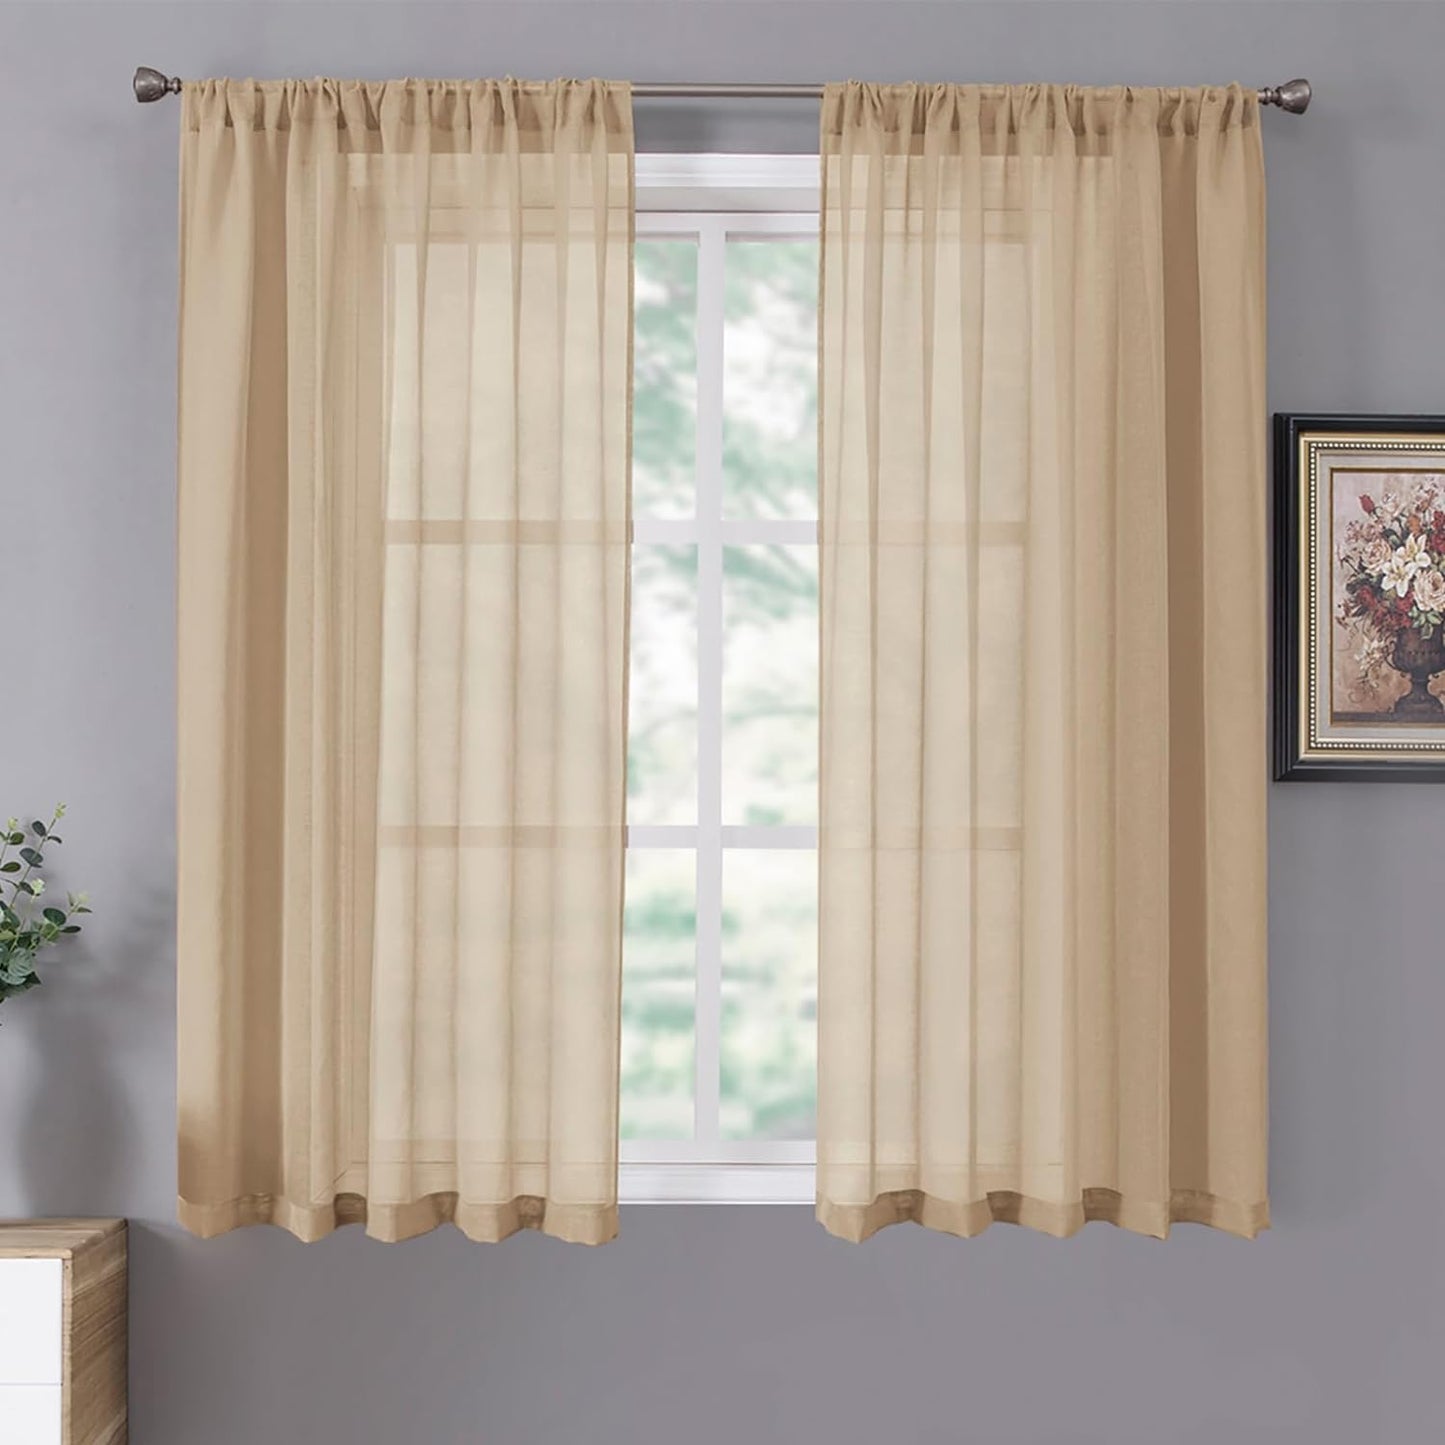 Tollpiz Short Sheer Curtains Linen Textured Bedroom Curtain Sheers Light Filtering Rod Pocket Voile Curtains for Living Room, 54 X 45 Inches Long, White, Set of 2 Panels  Tollpiz Tex Beige 54"W X 54"L 